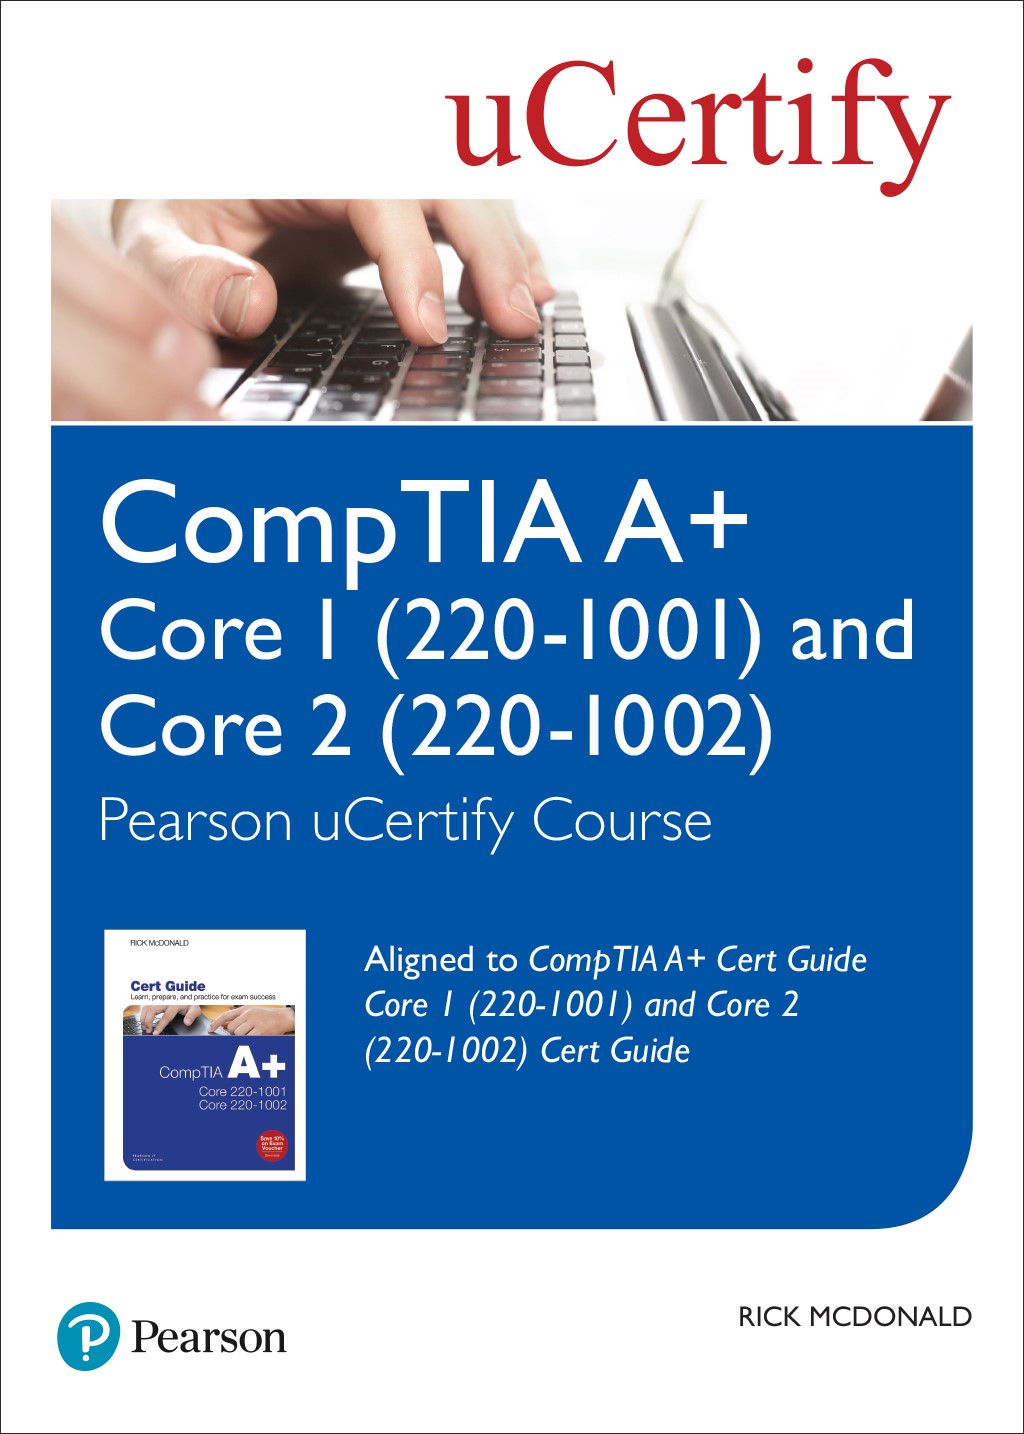 CompTIA A+ Core 1 (220-1001) and Core 2 (220-1002) Cert Guide uCertify Course Student Access Card, 5th Edition